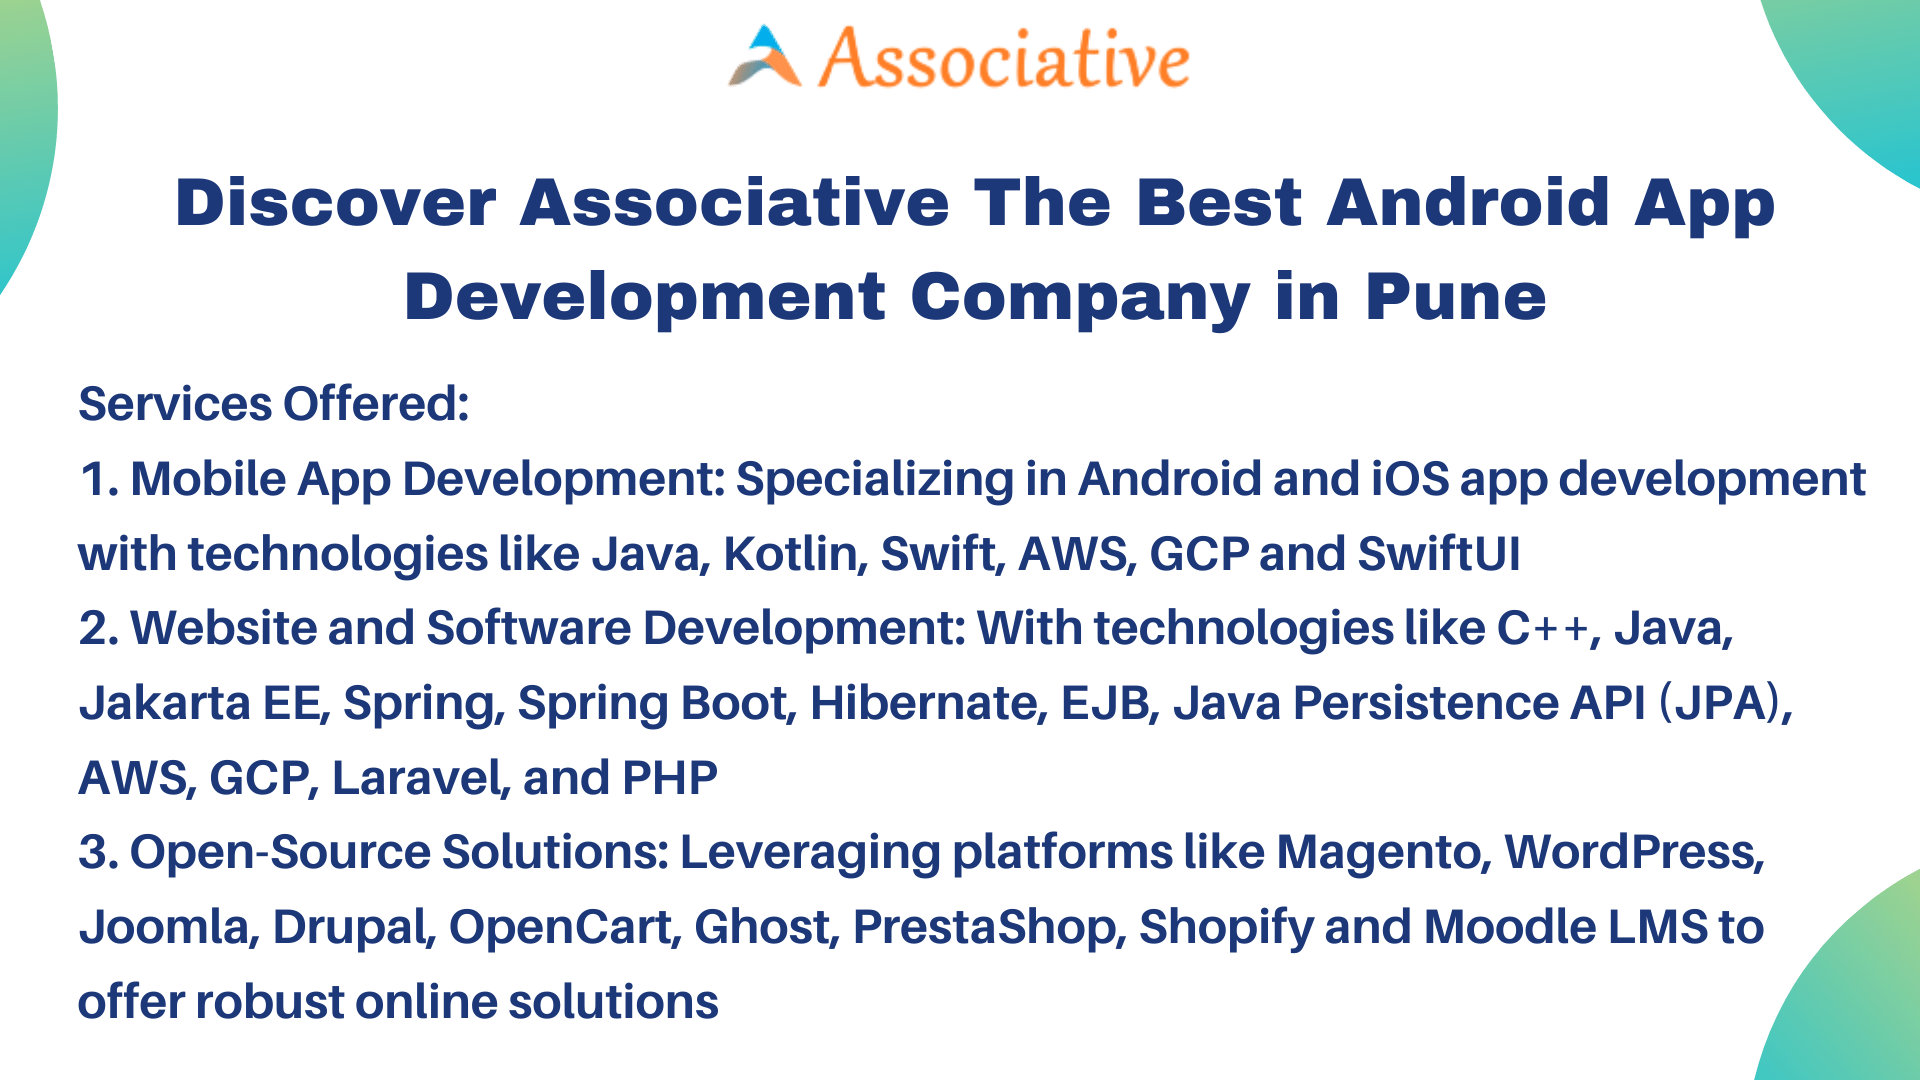 Discover Associative The Best Android App Development Company in Pune